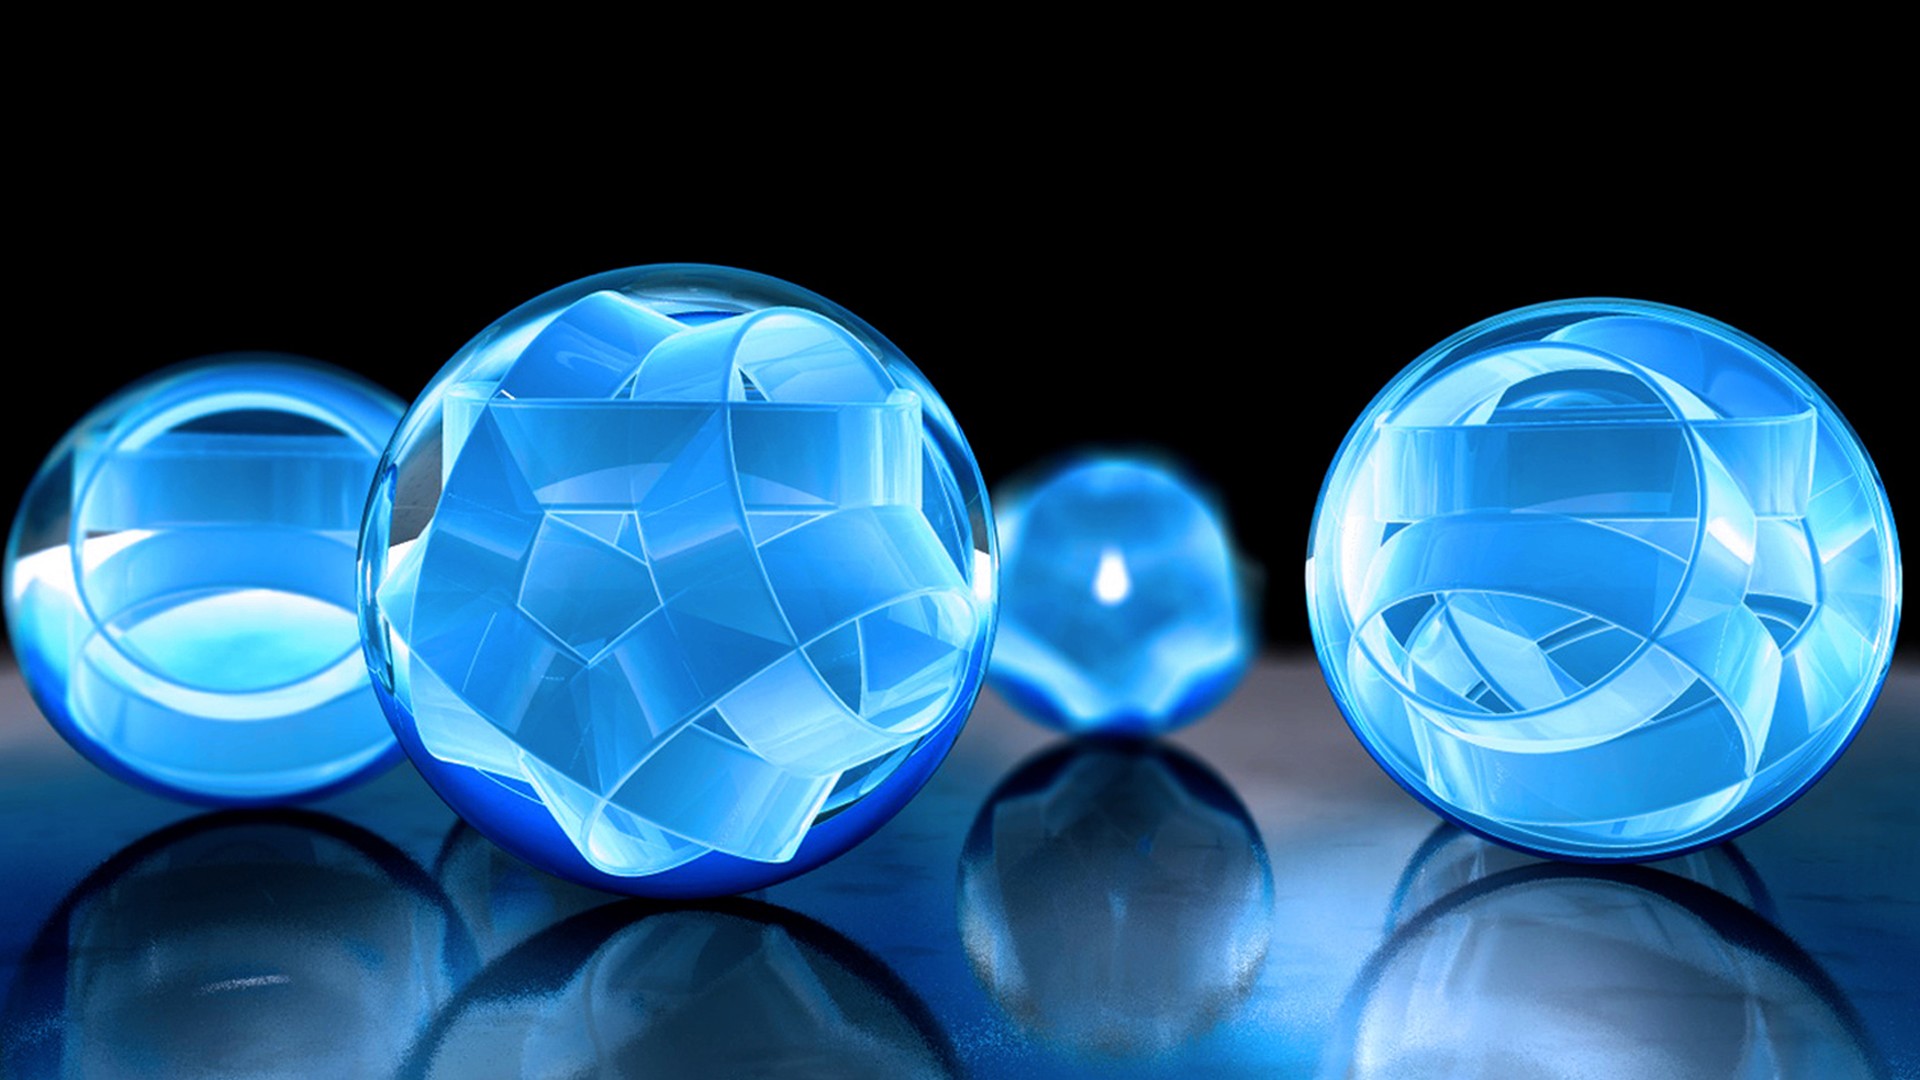 sphere, Abstract, Shapes, Blue, Reflection Wallpaper